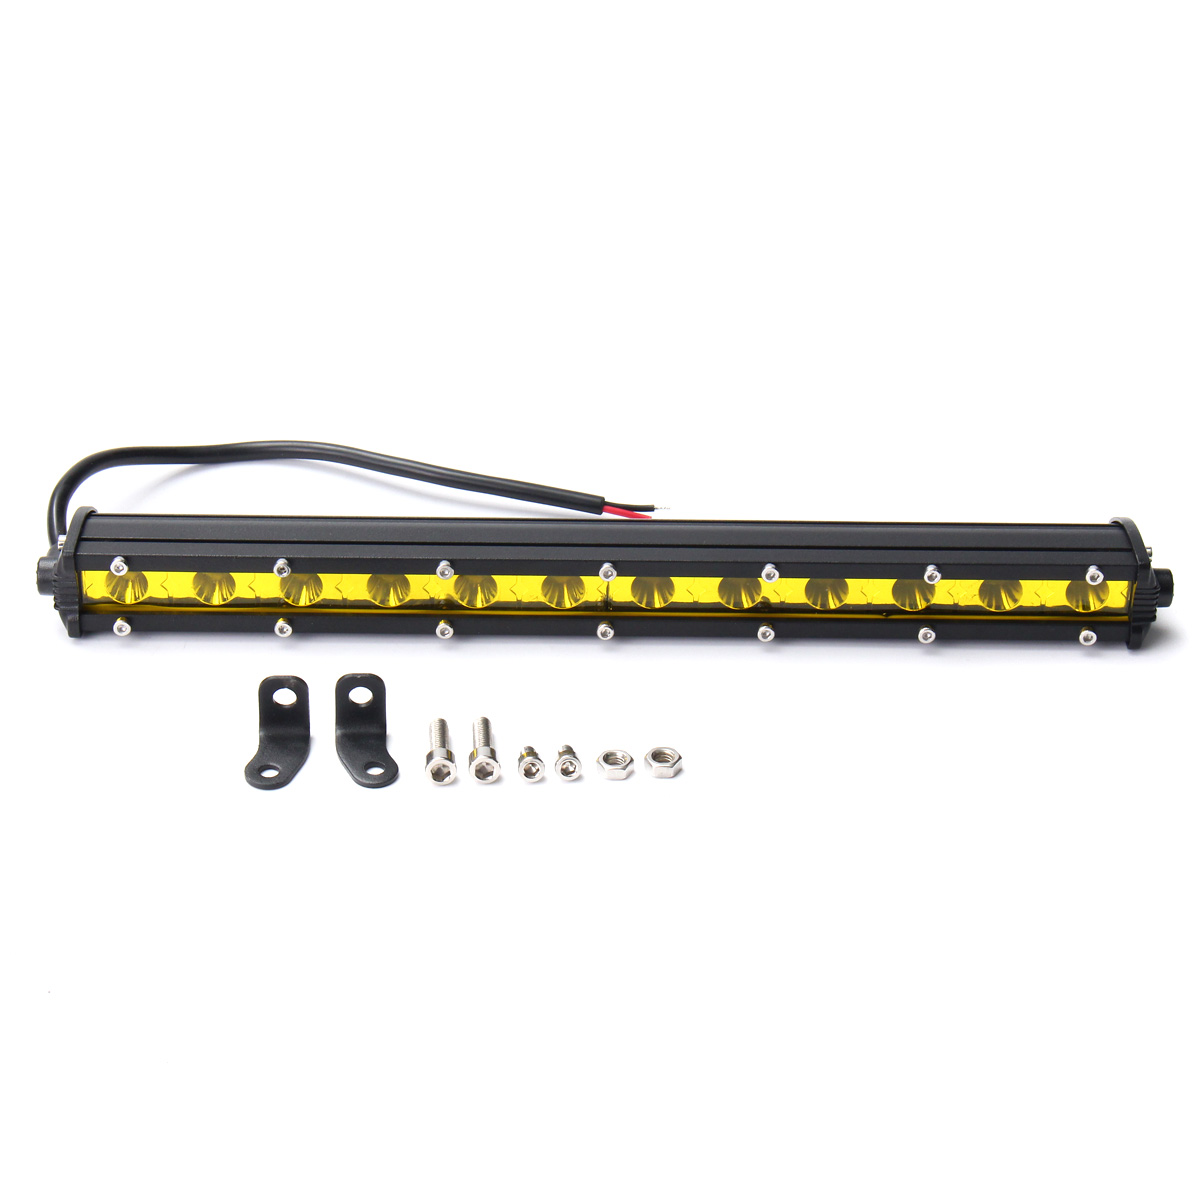 126Inch-36W-LED-Work-Light-Bar-Waterproof-Spotlight-Yellow-DC12-24V-for-Off-Road-SUV-Truck-1375375